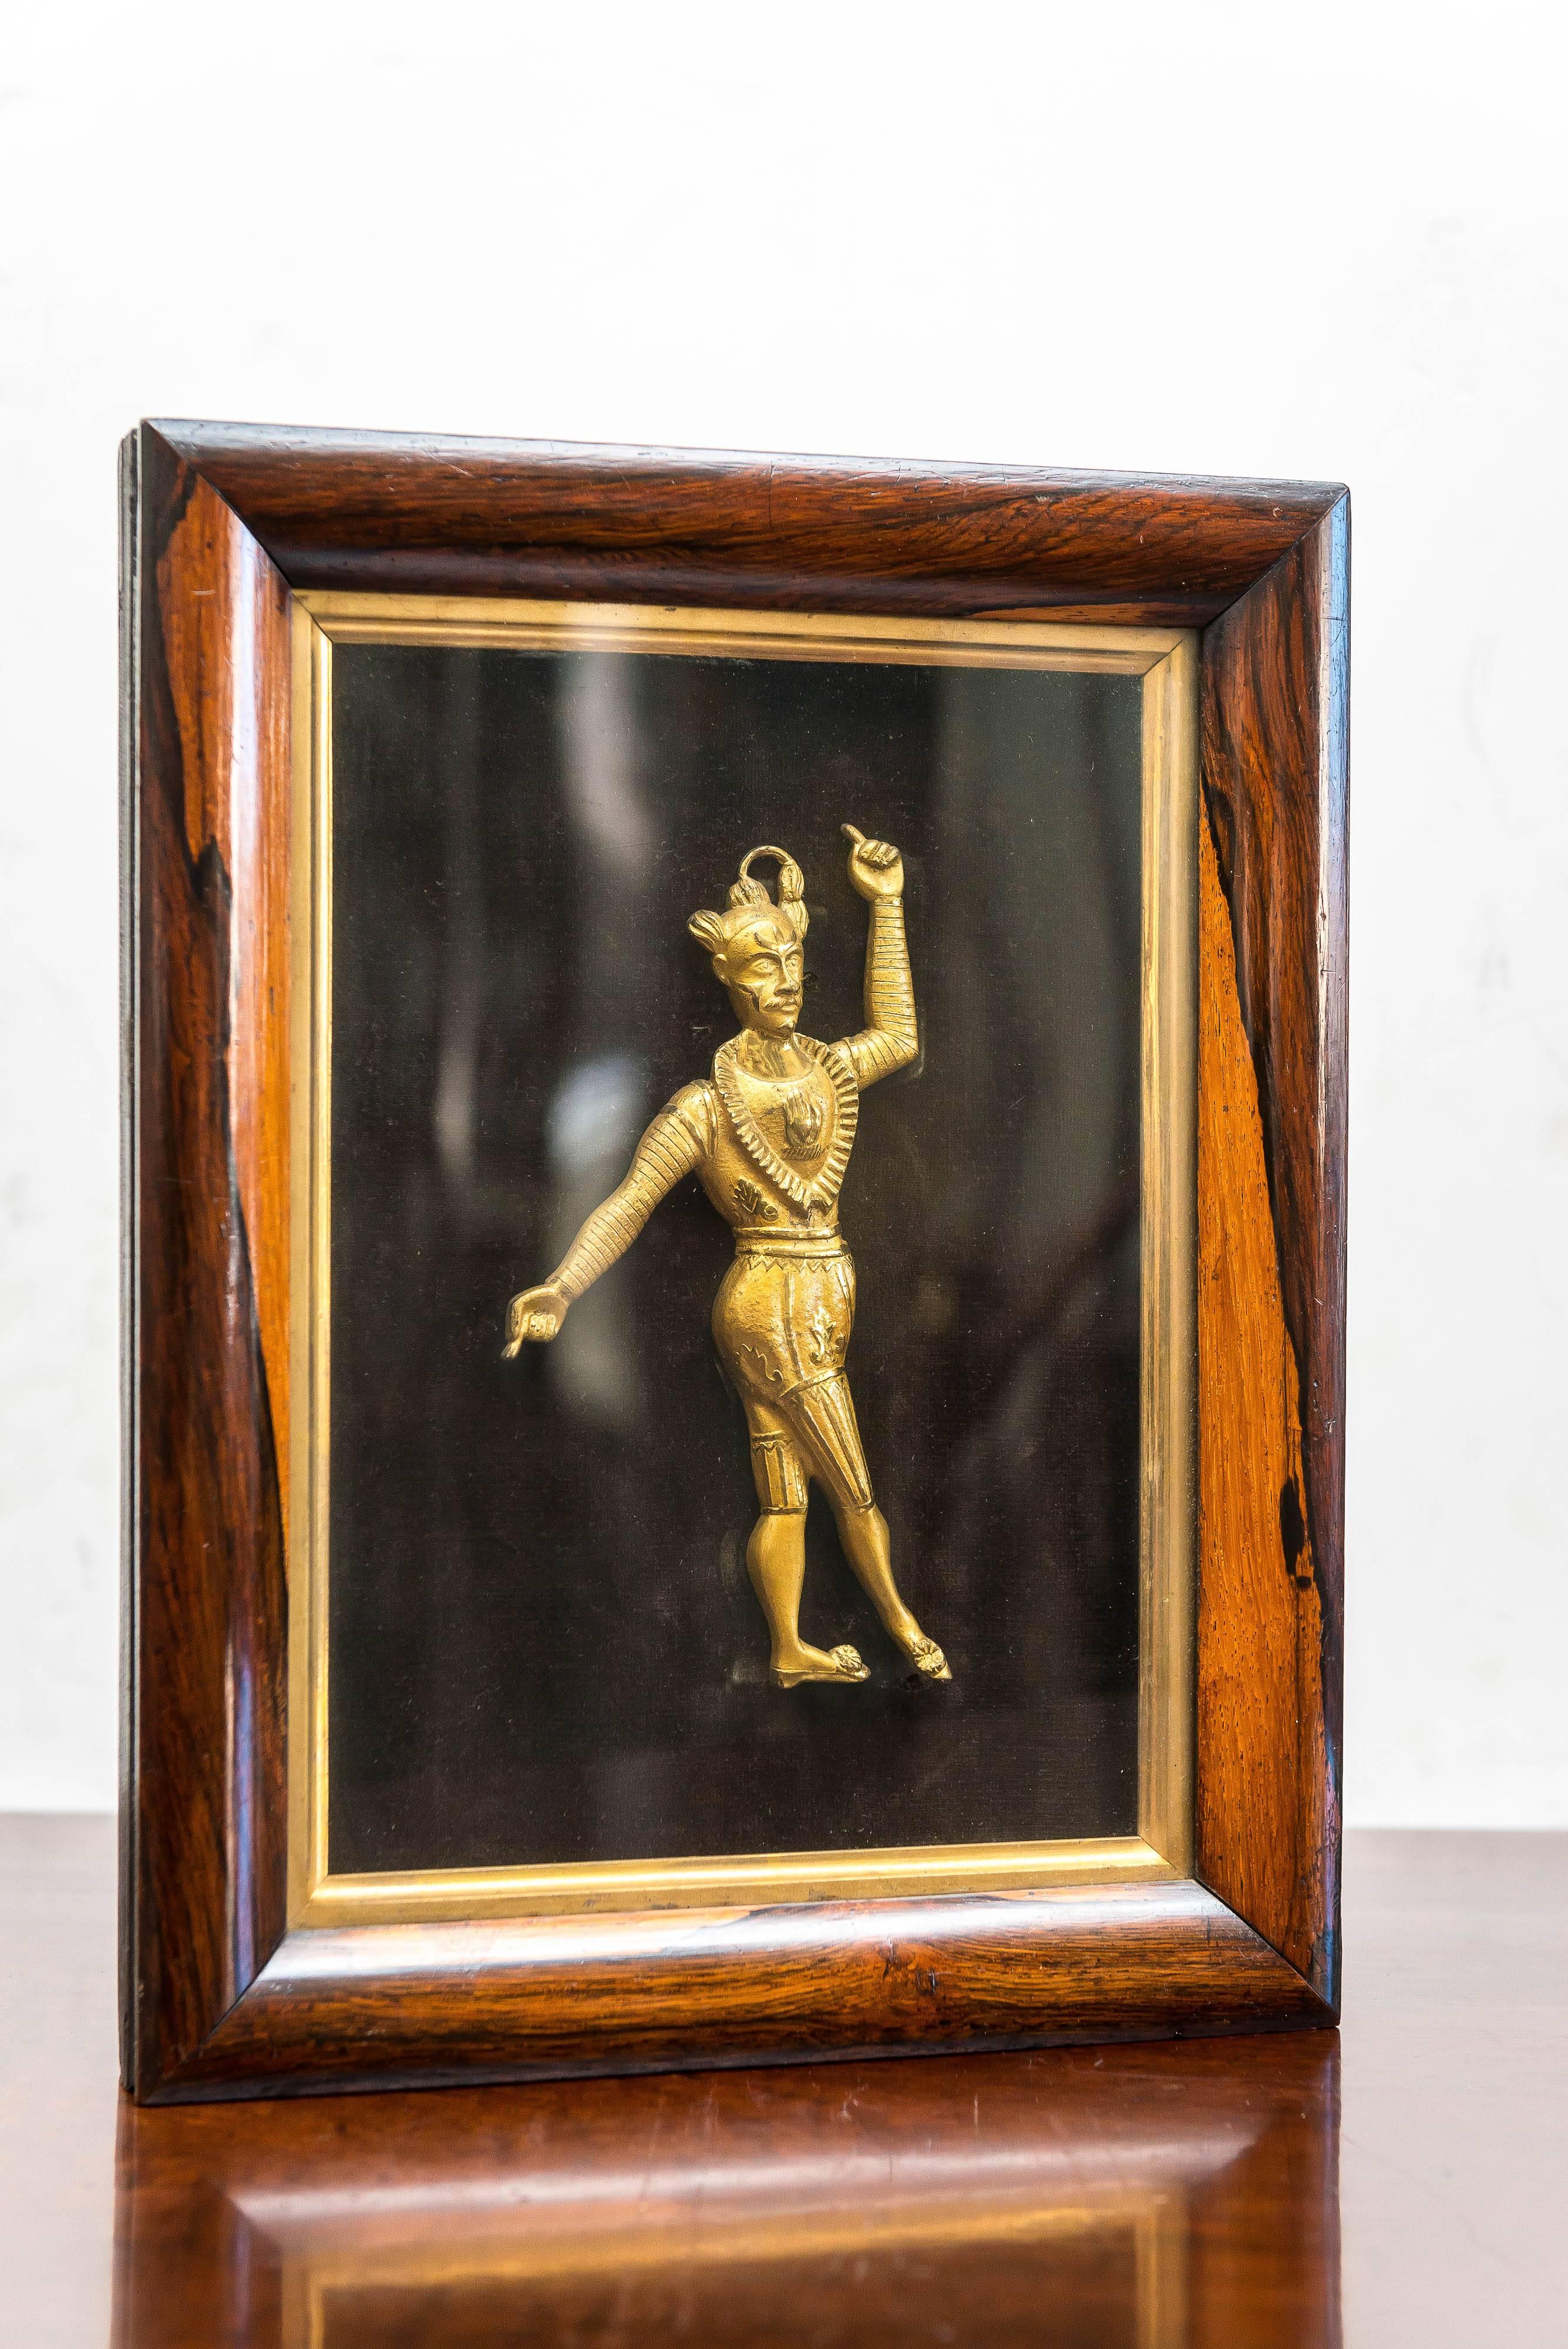 English Regency framed, fine gilt, repousse, copper figure of an exotic actor. Circa 1820. 
In the manner of a carriage decoration. Finely chiseled repousse form bearing telling details of a performance.
A somewhat Shakespearian figure posed on